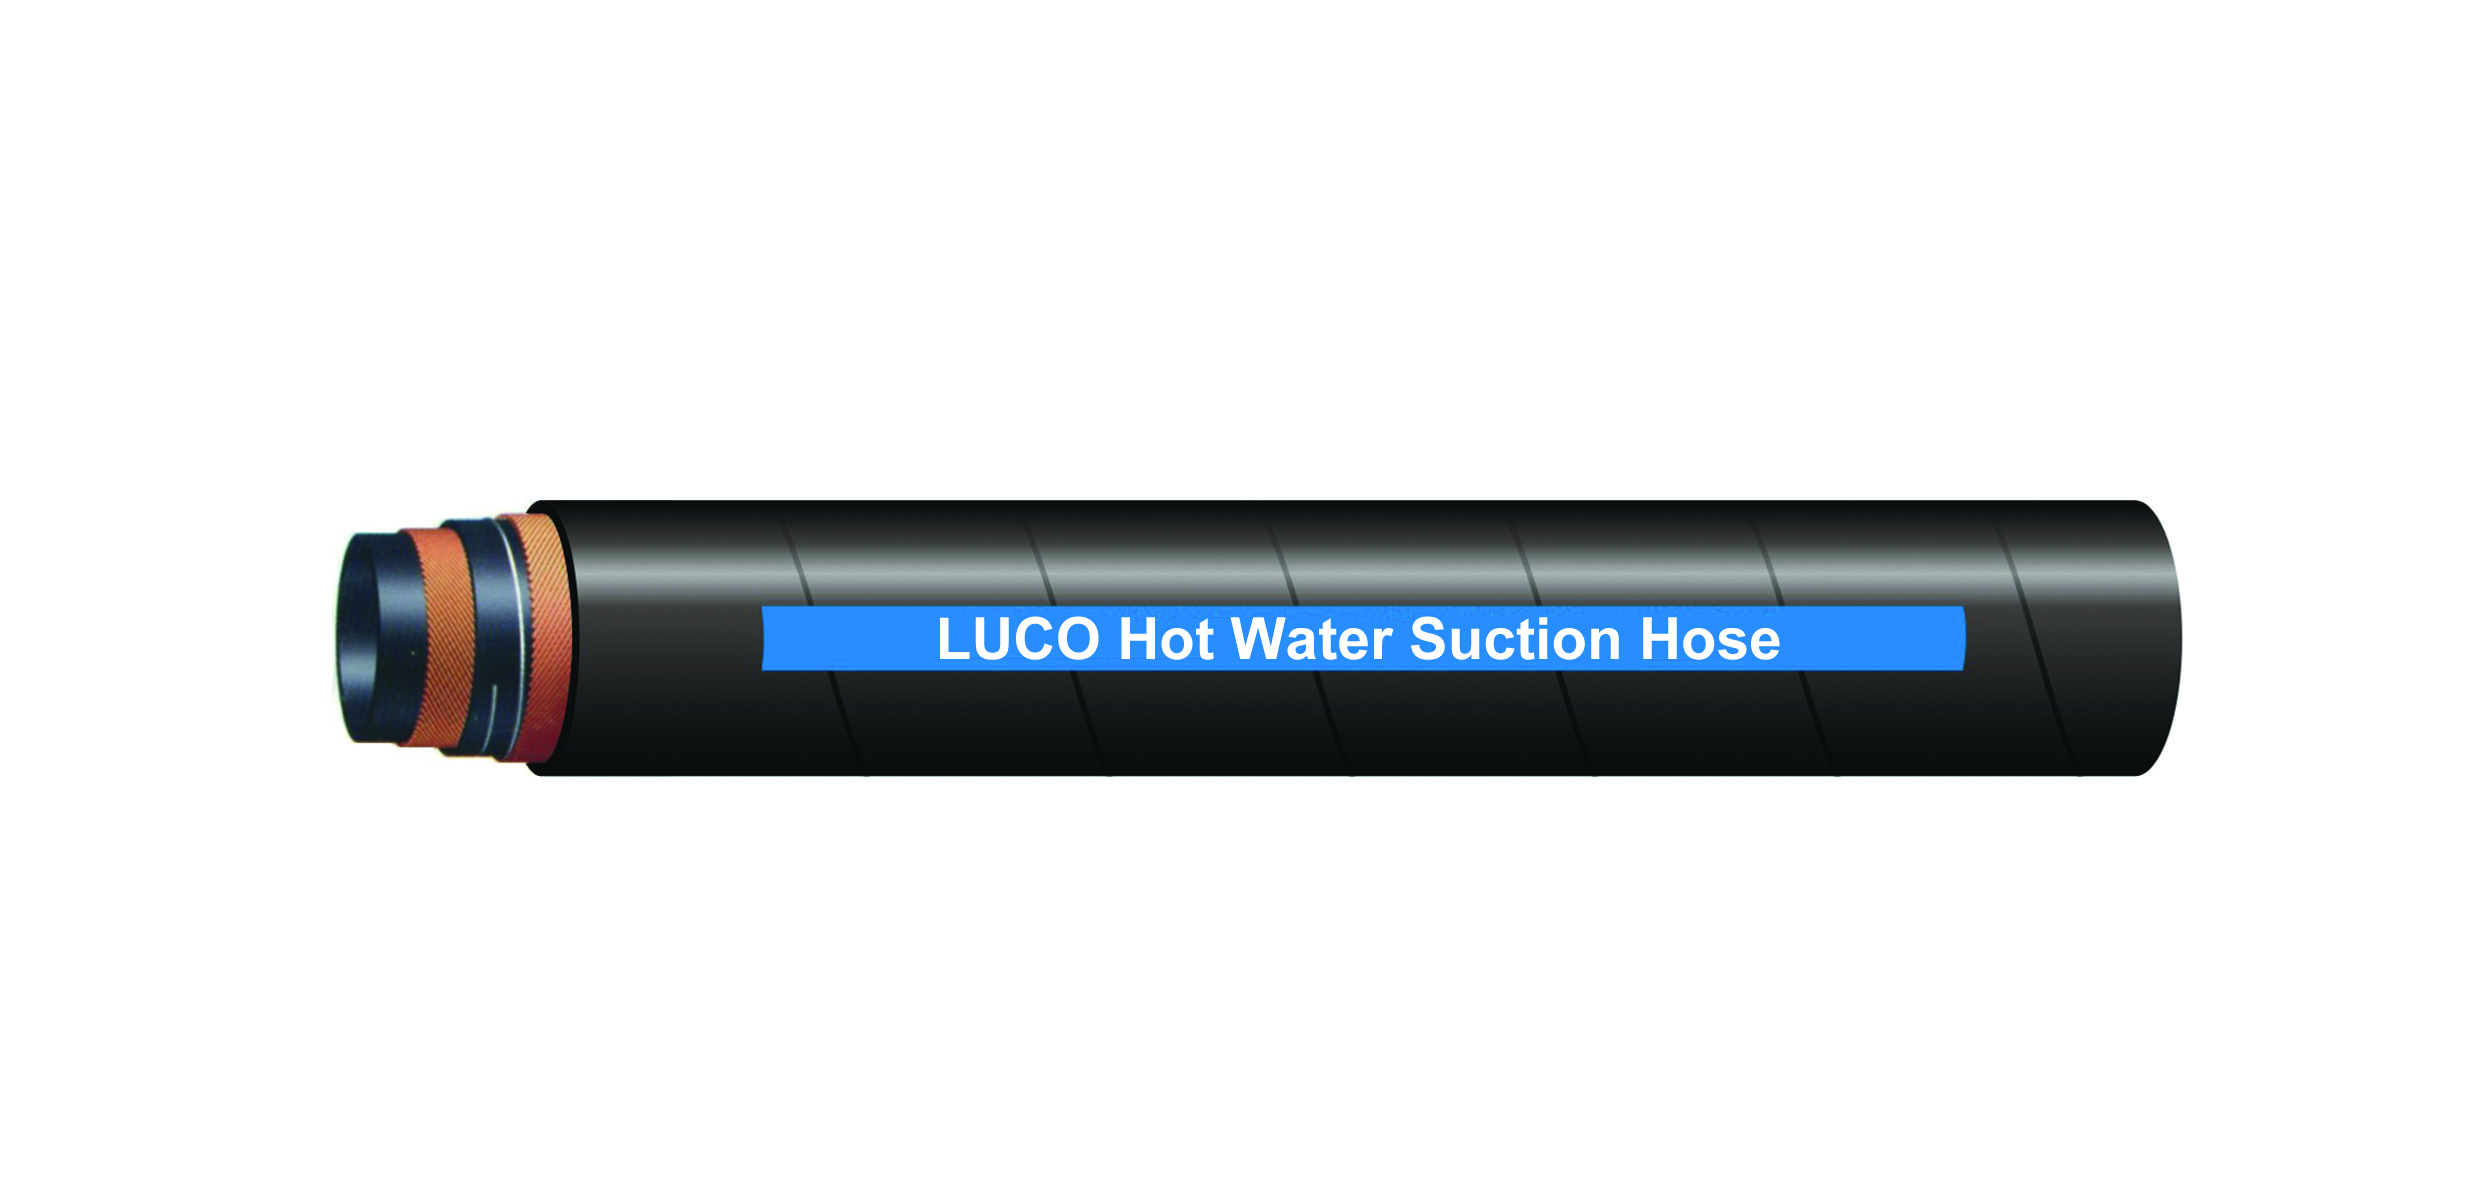 LUCOHOSE Hot Water Suction Hose-150PSI